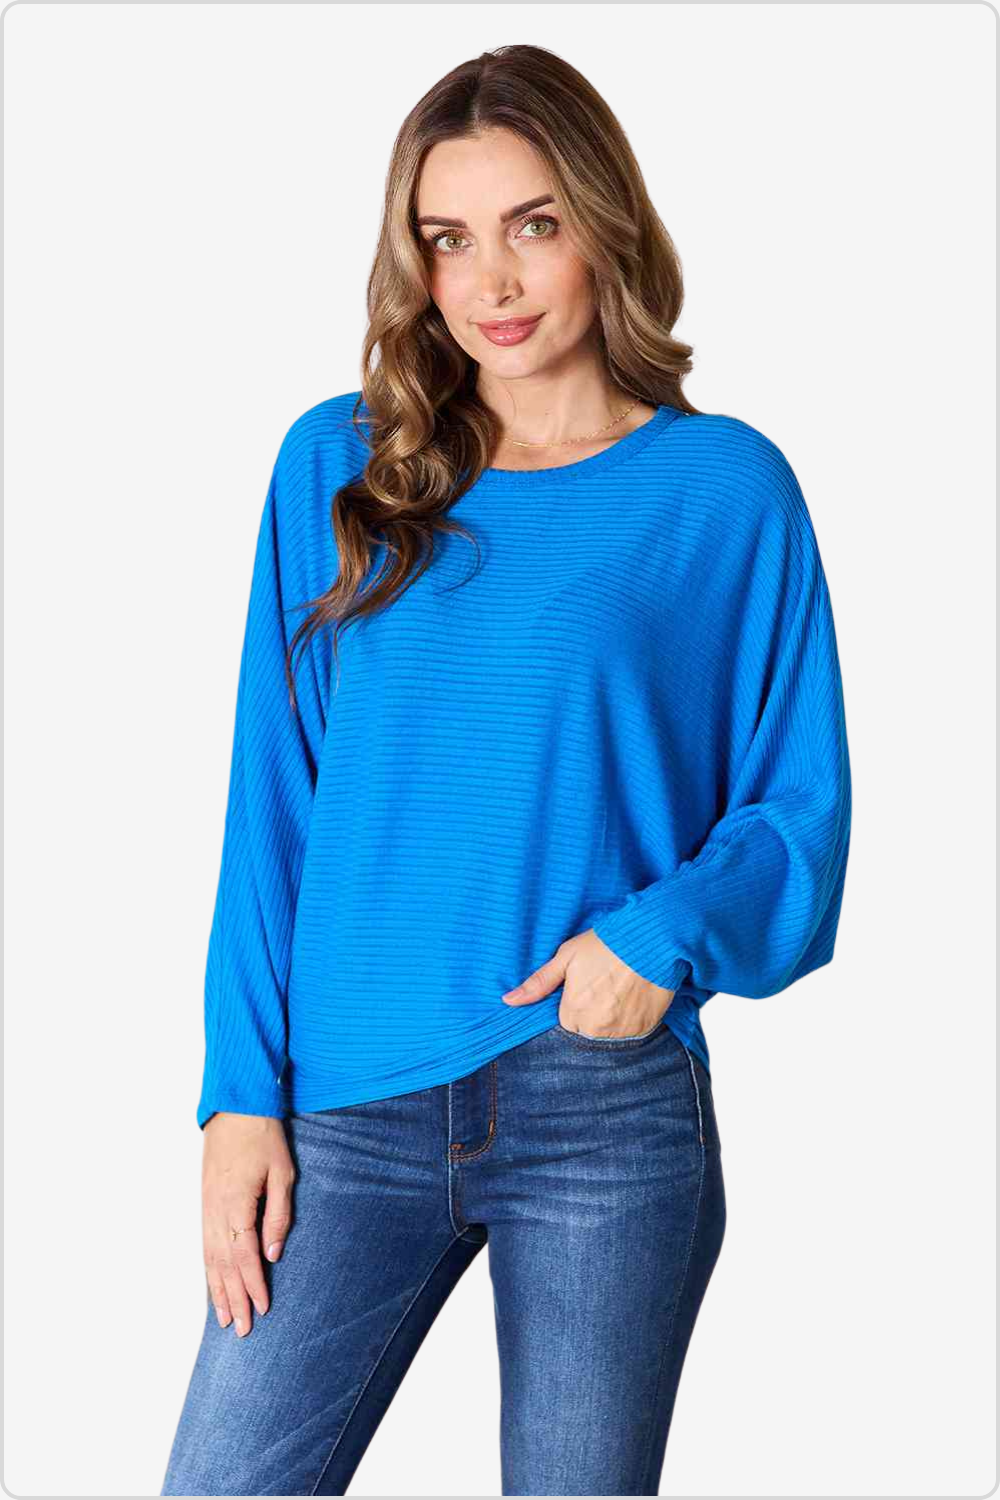 Fashionable Batwing Sleeve Blouse for Every Occasion